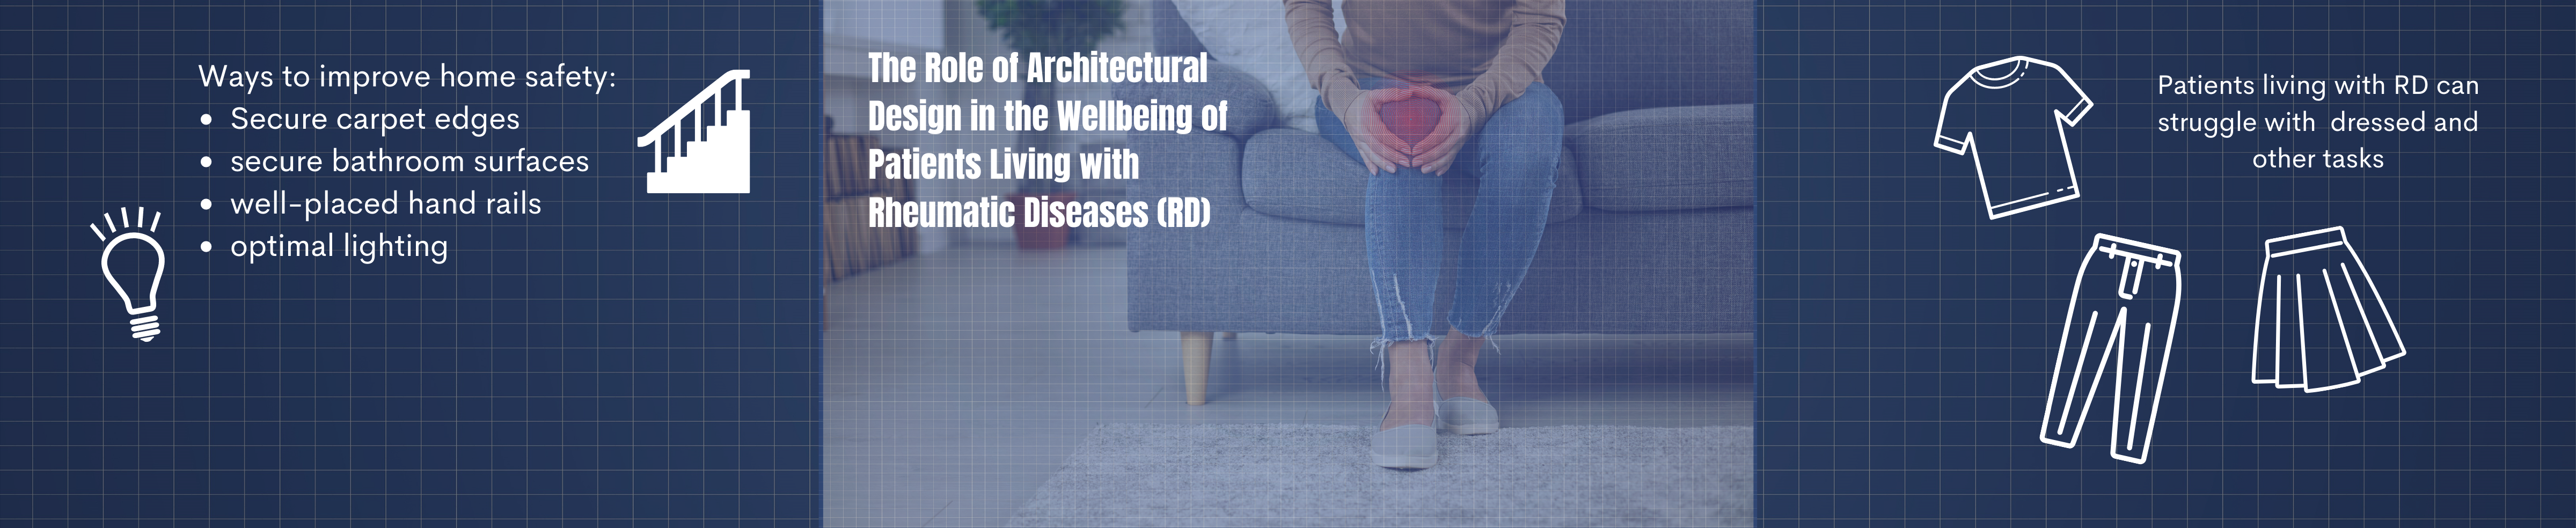 The Role of Architectural Design in the Wellbeing of Patients Living with Rheumatic Diseases (RD)